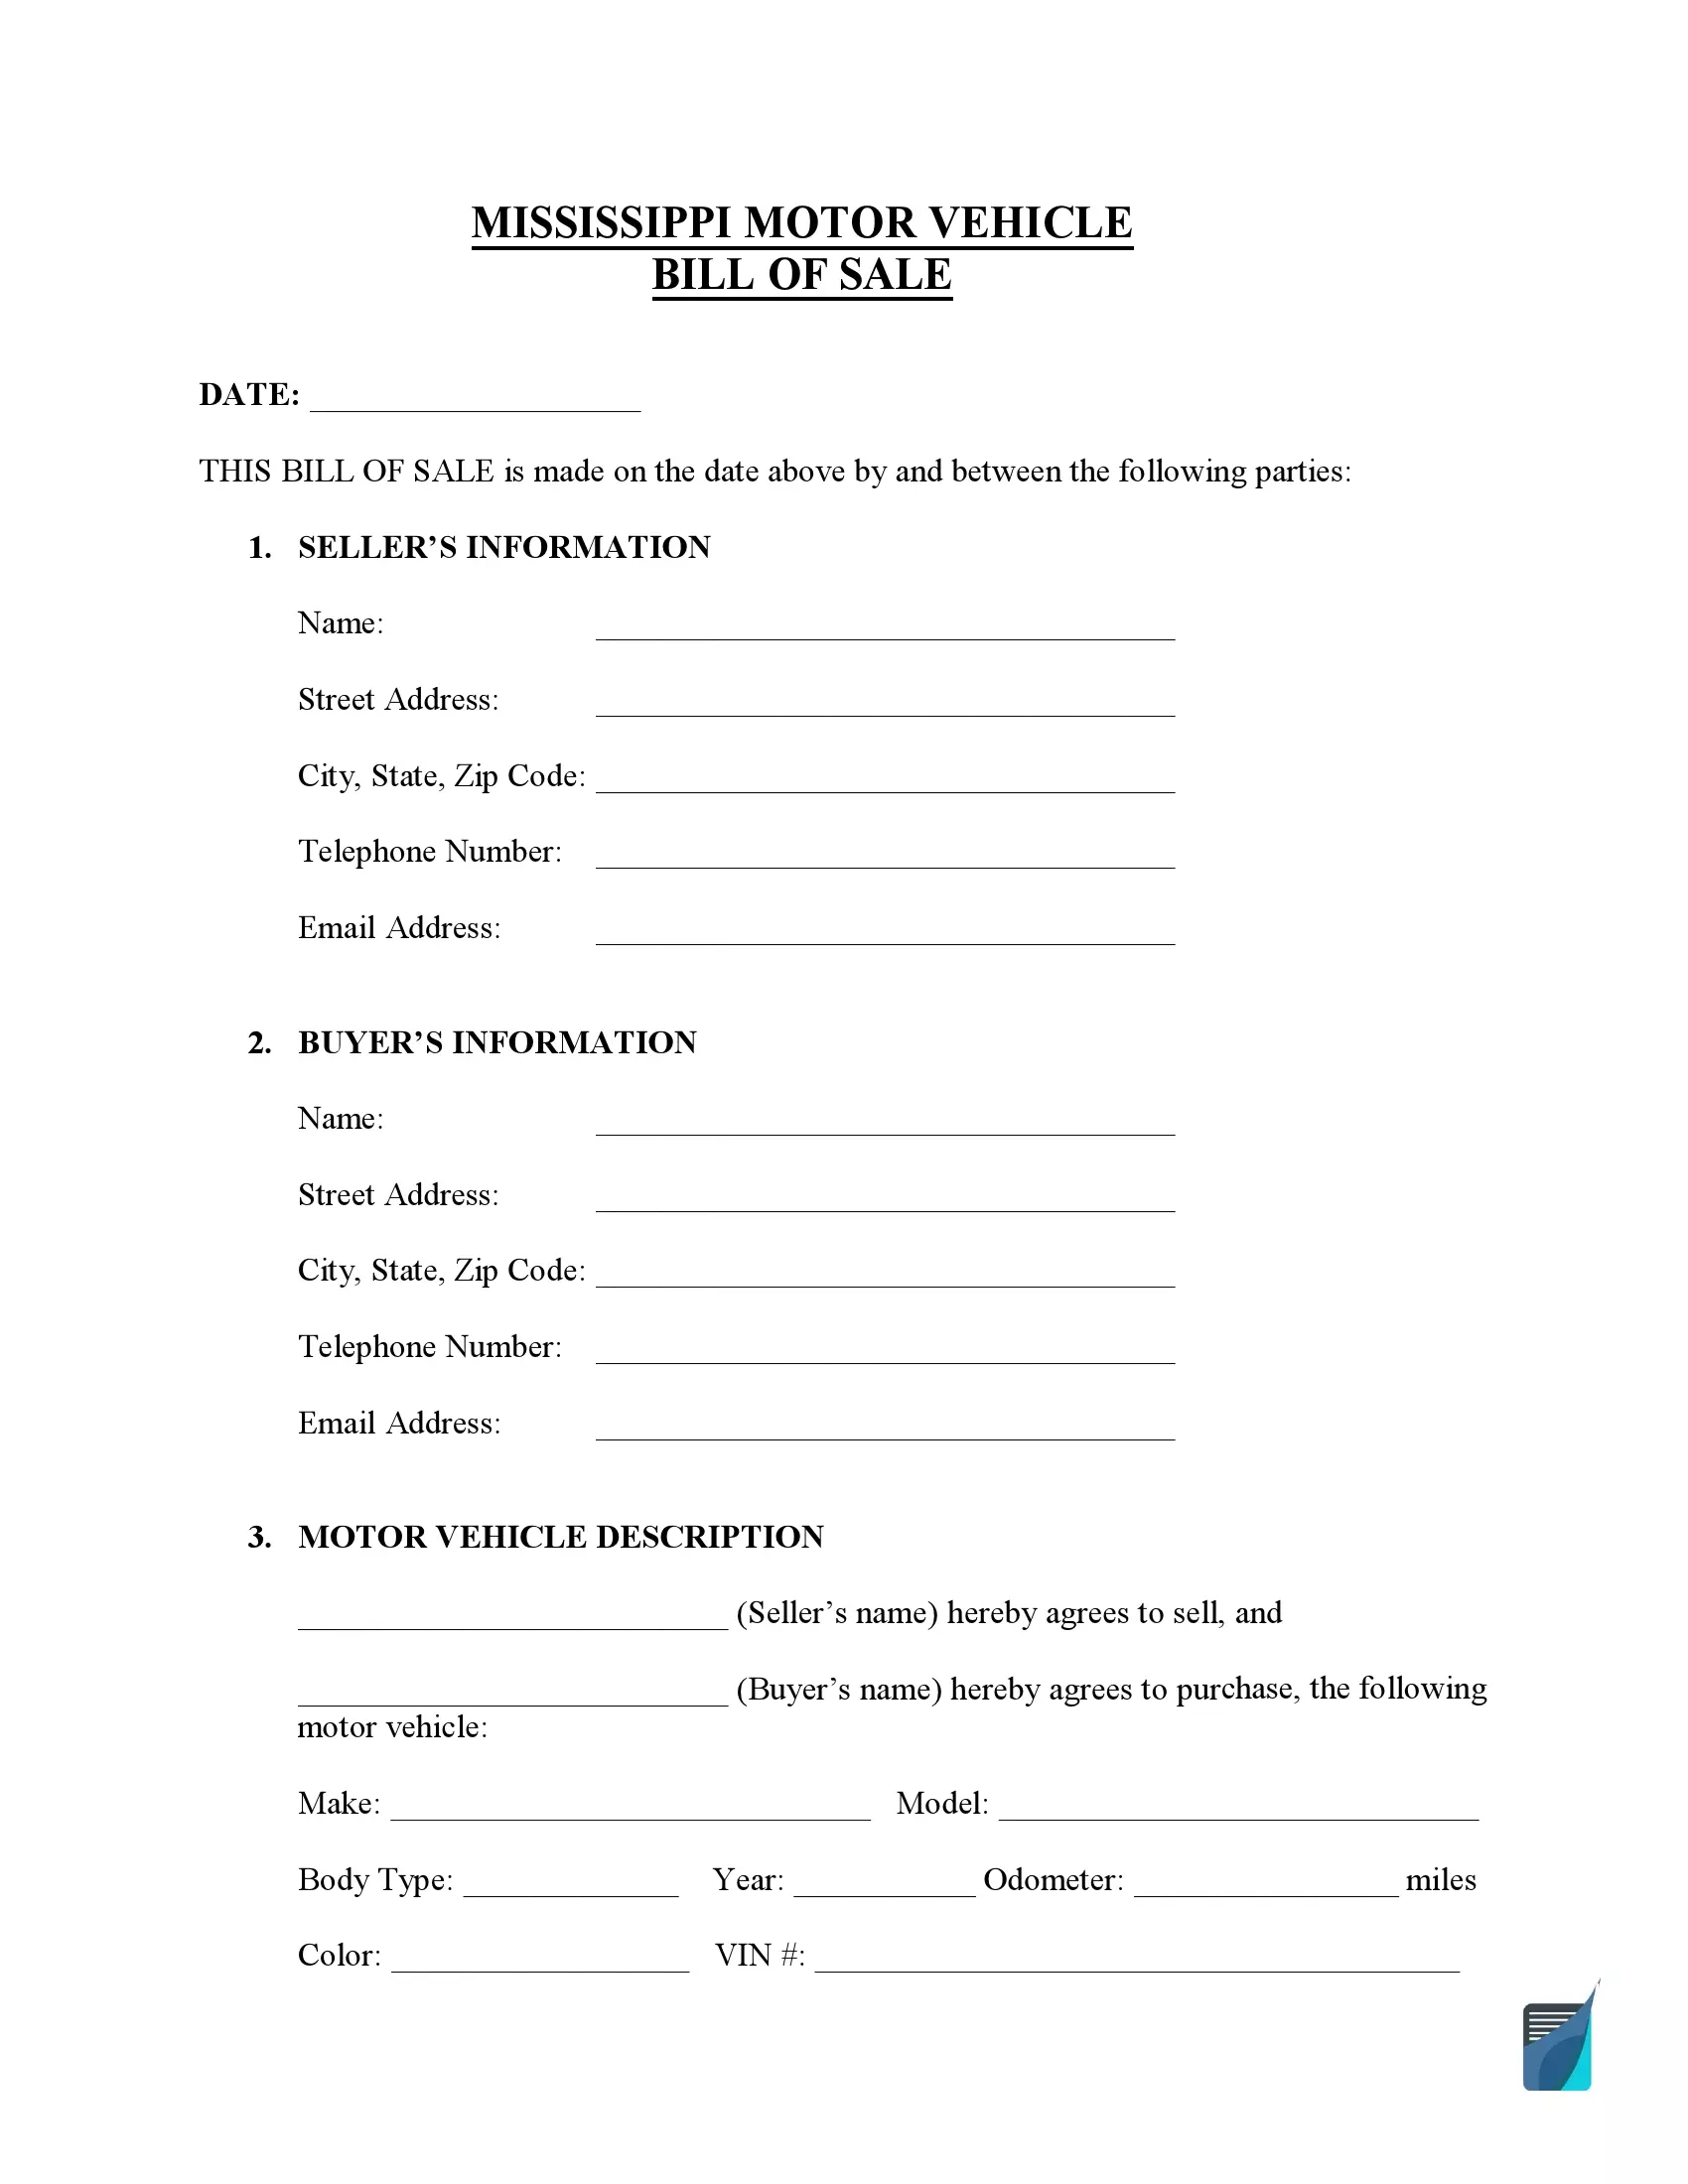 Mississippi-motor-vehicle-bill-of-sale-template